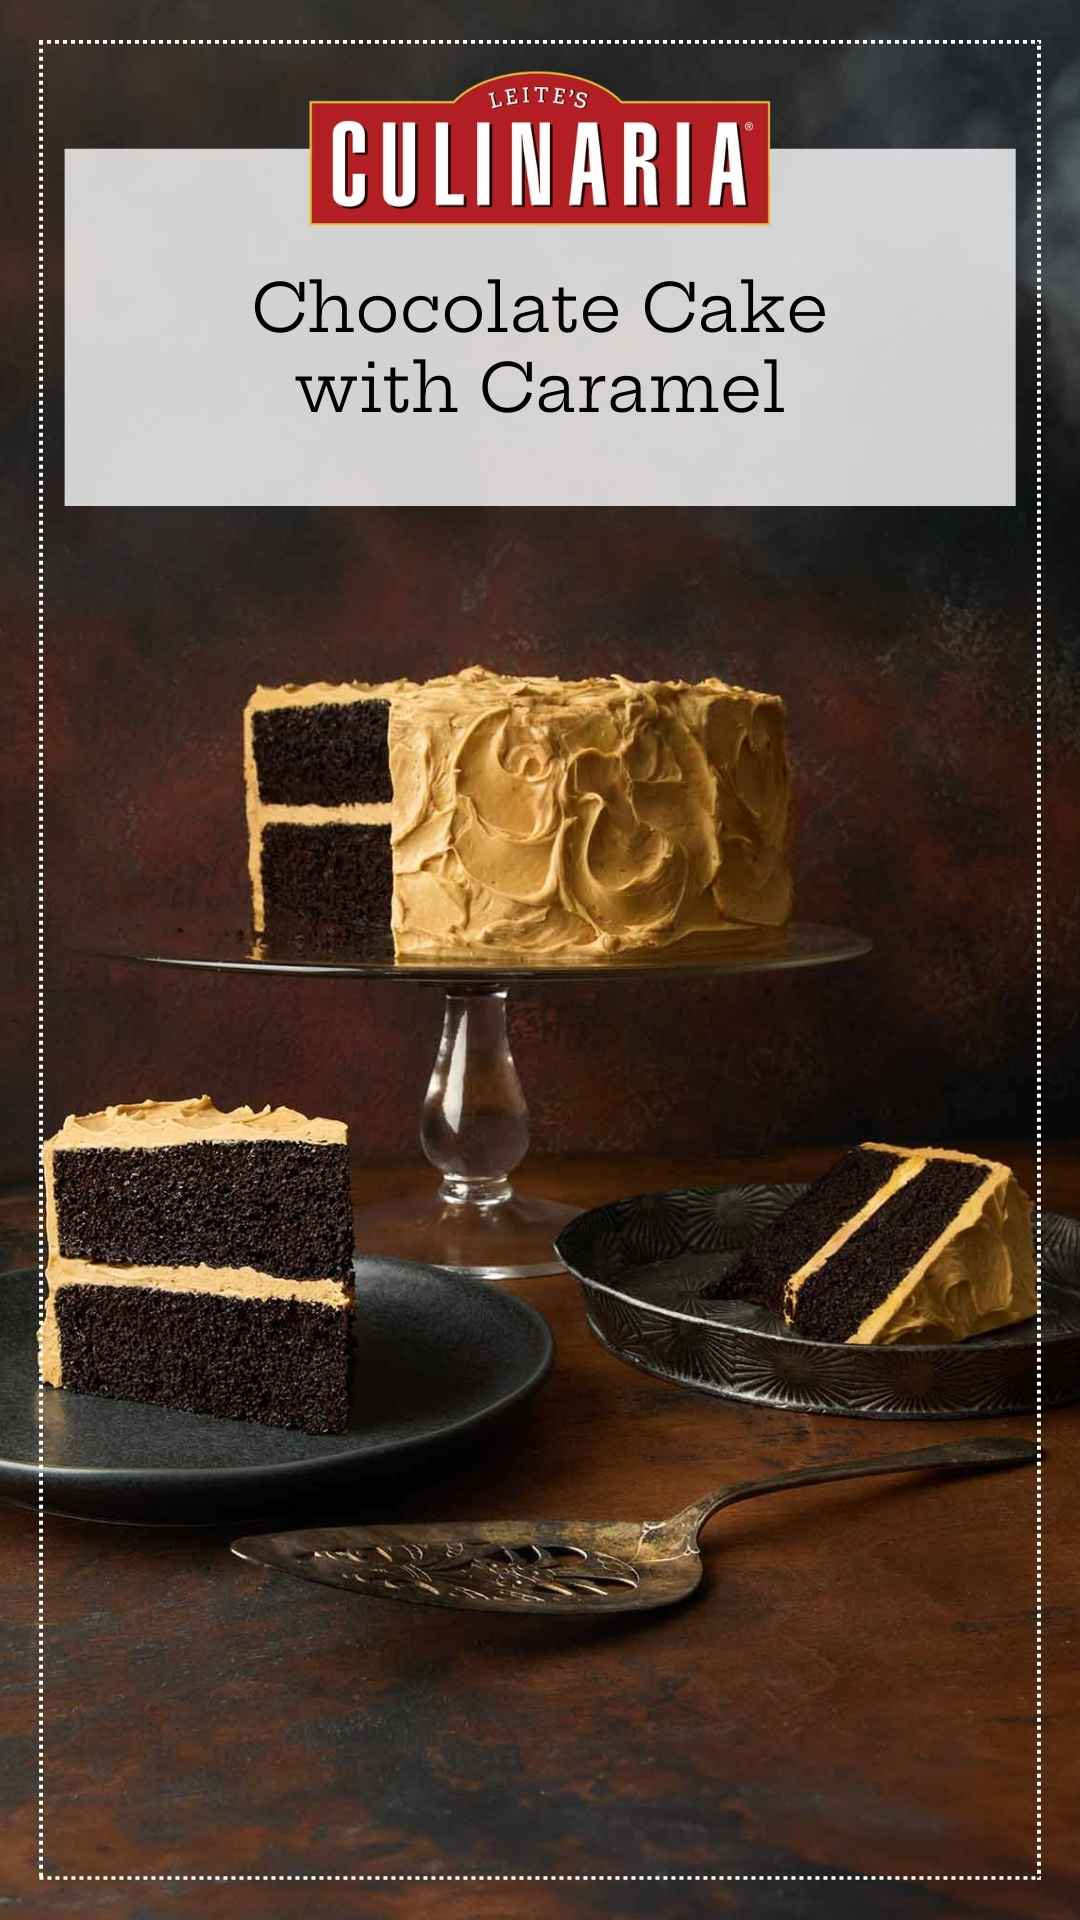 A chocolate caramel cake on a cake stand, with two slices cut from it on plates nearby.